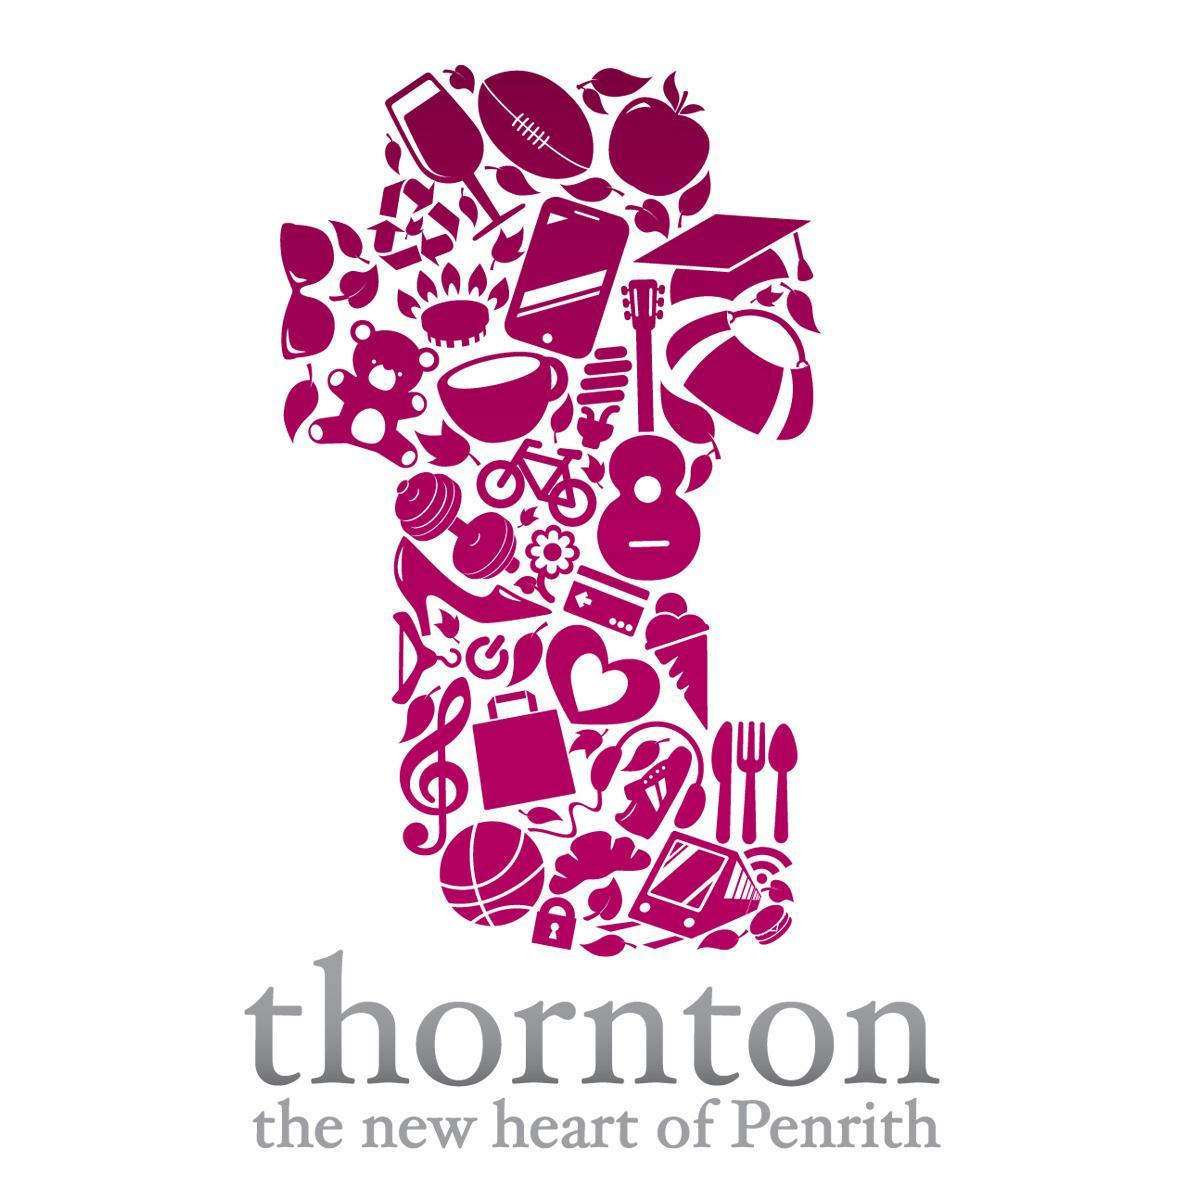 The heart of Thornton! We'll be tweeting news, events and activities happening in and around Thornton, Penrith! #thorntonlife